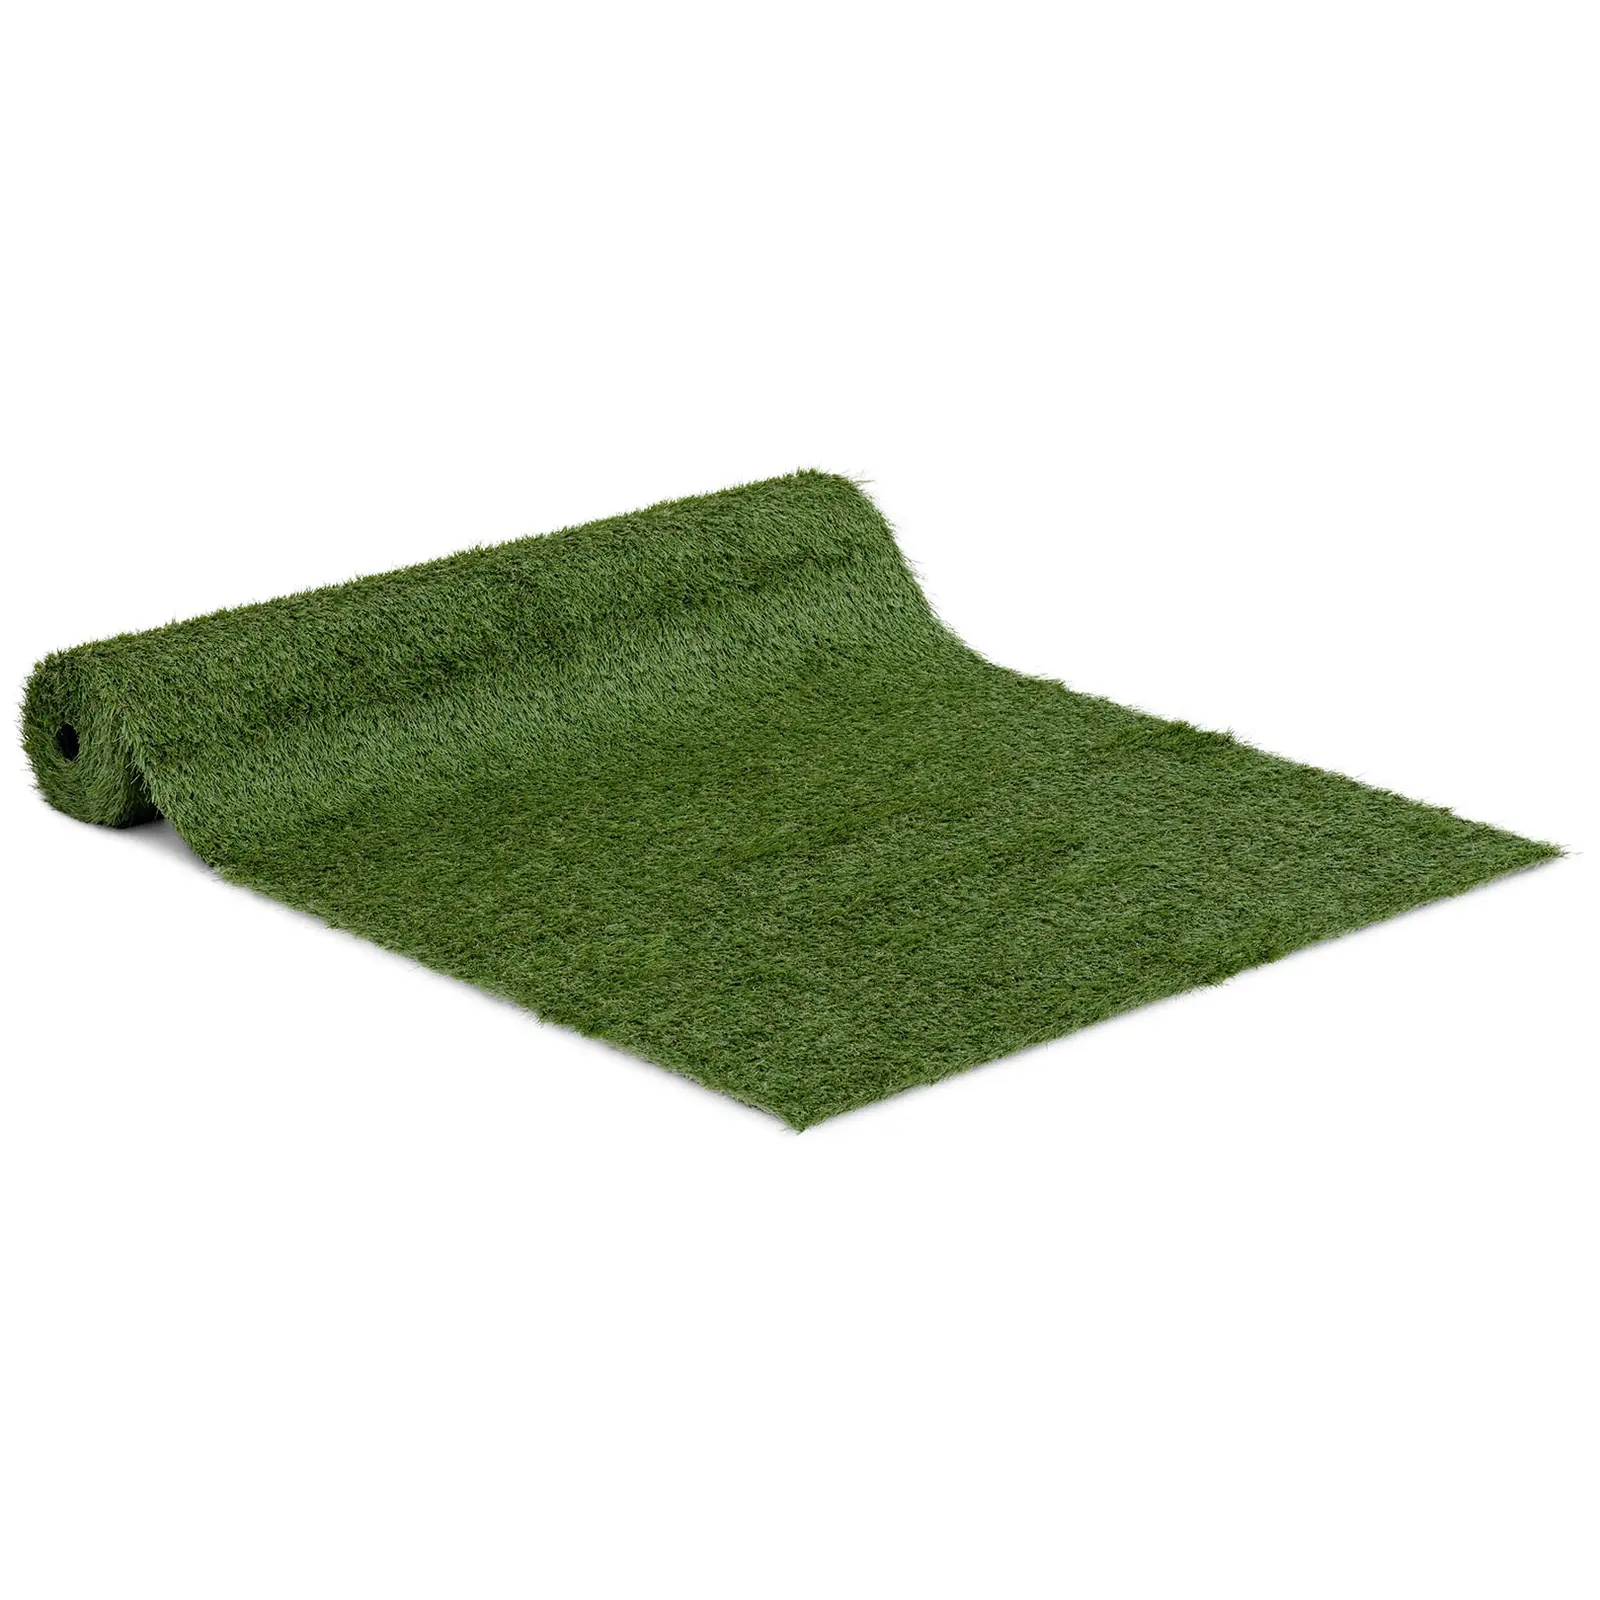 Artificial grass - 100 x 400 cm - Height: 30 mm - Stitch rate: 14/10 cm - UV-resistant